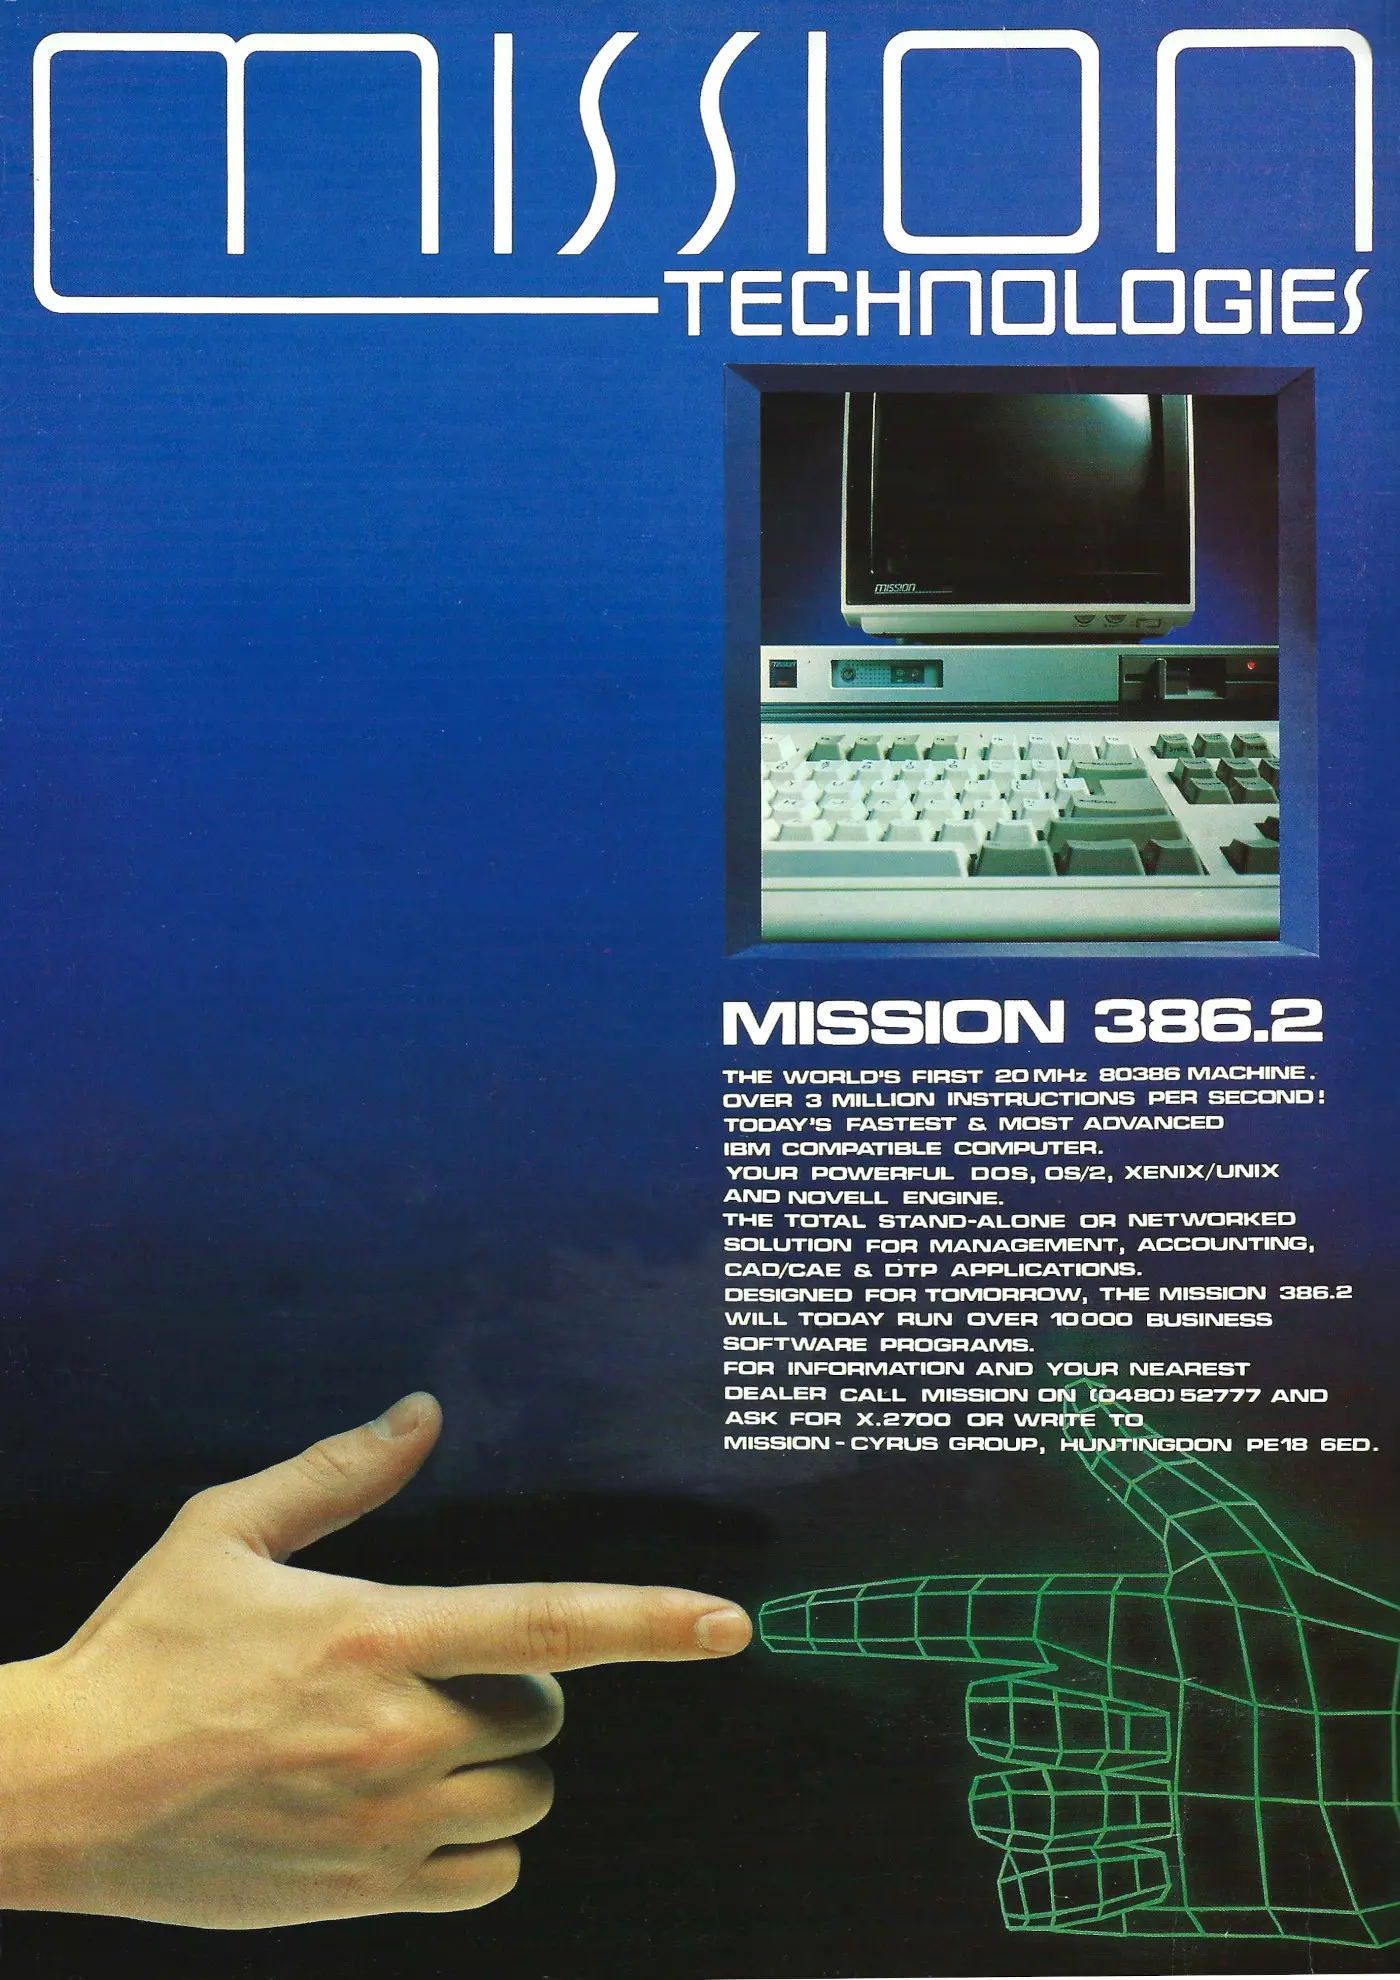 Mission Advert: Mission 386.2: The world's first 20MHz 80386 machine., from Personal Computer World, January 1988